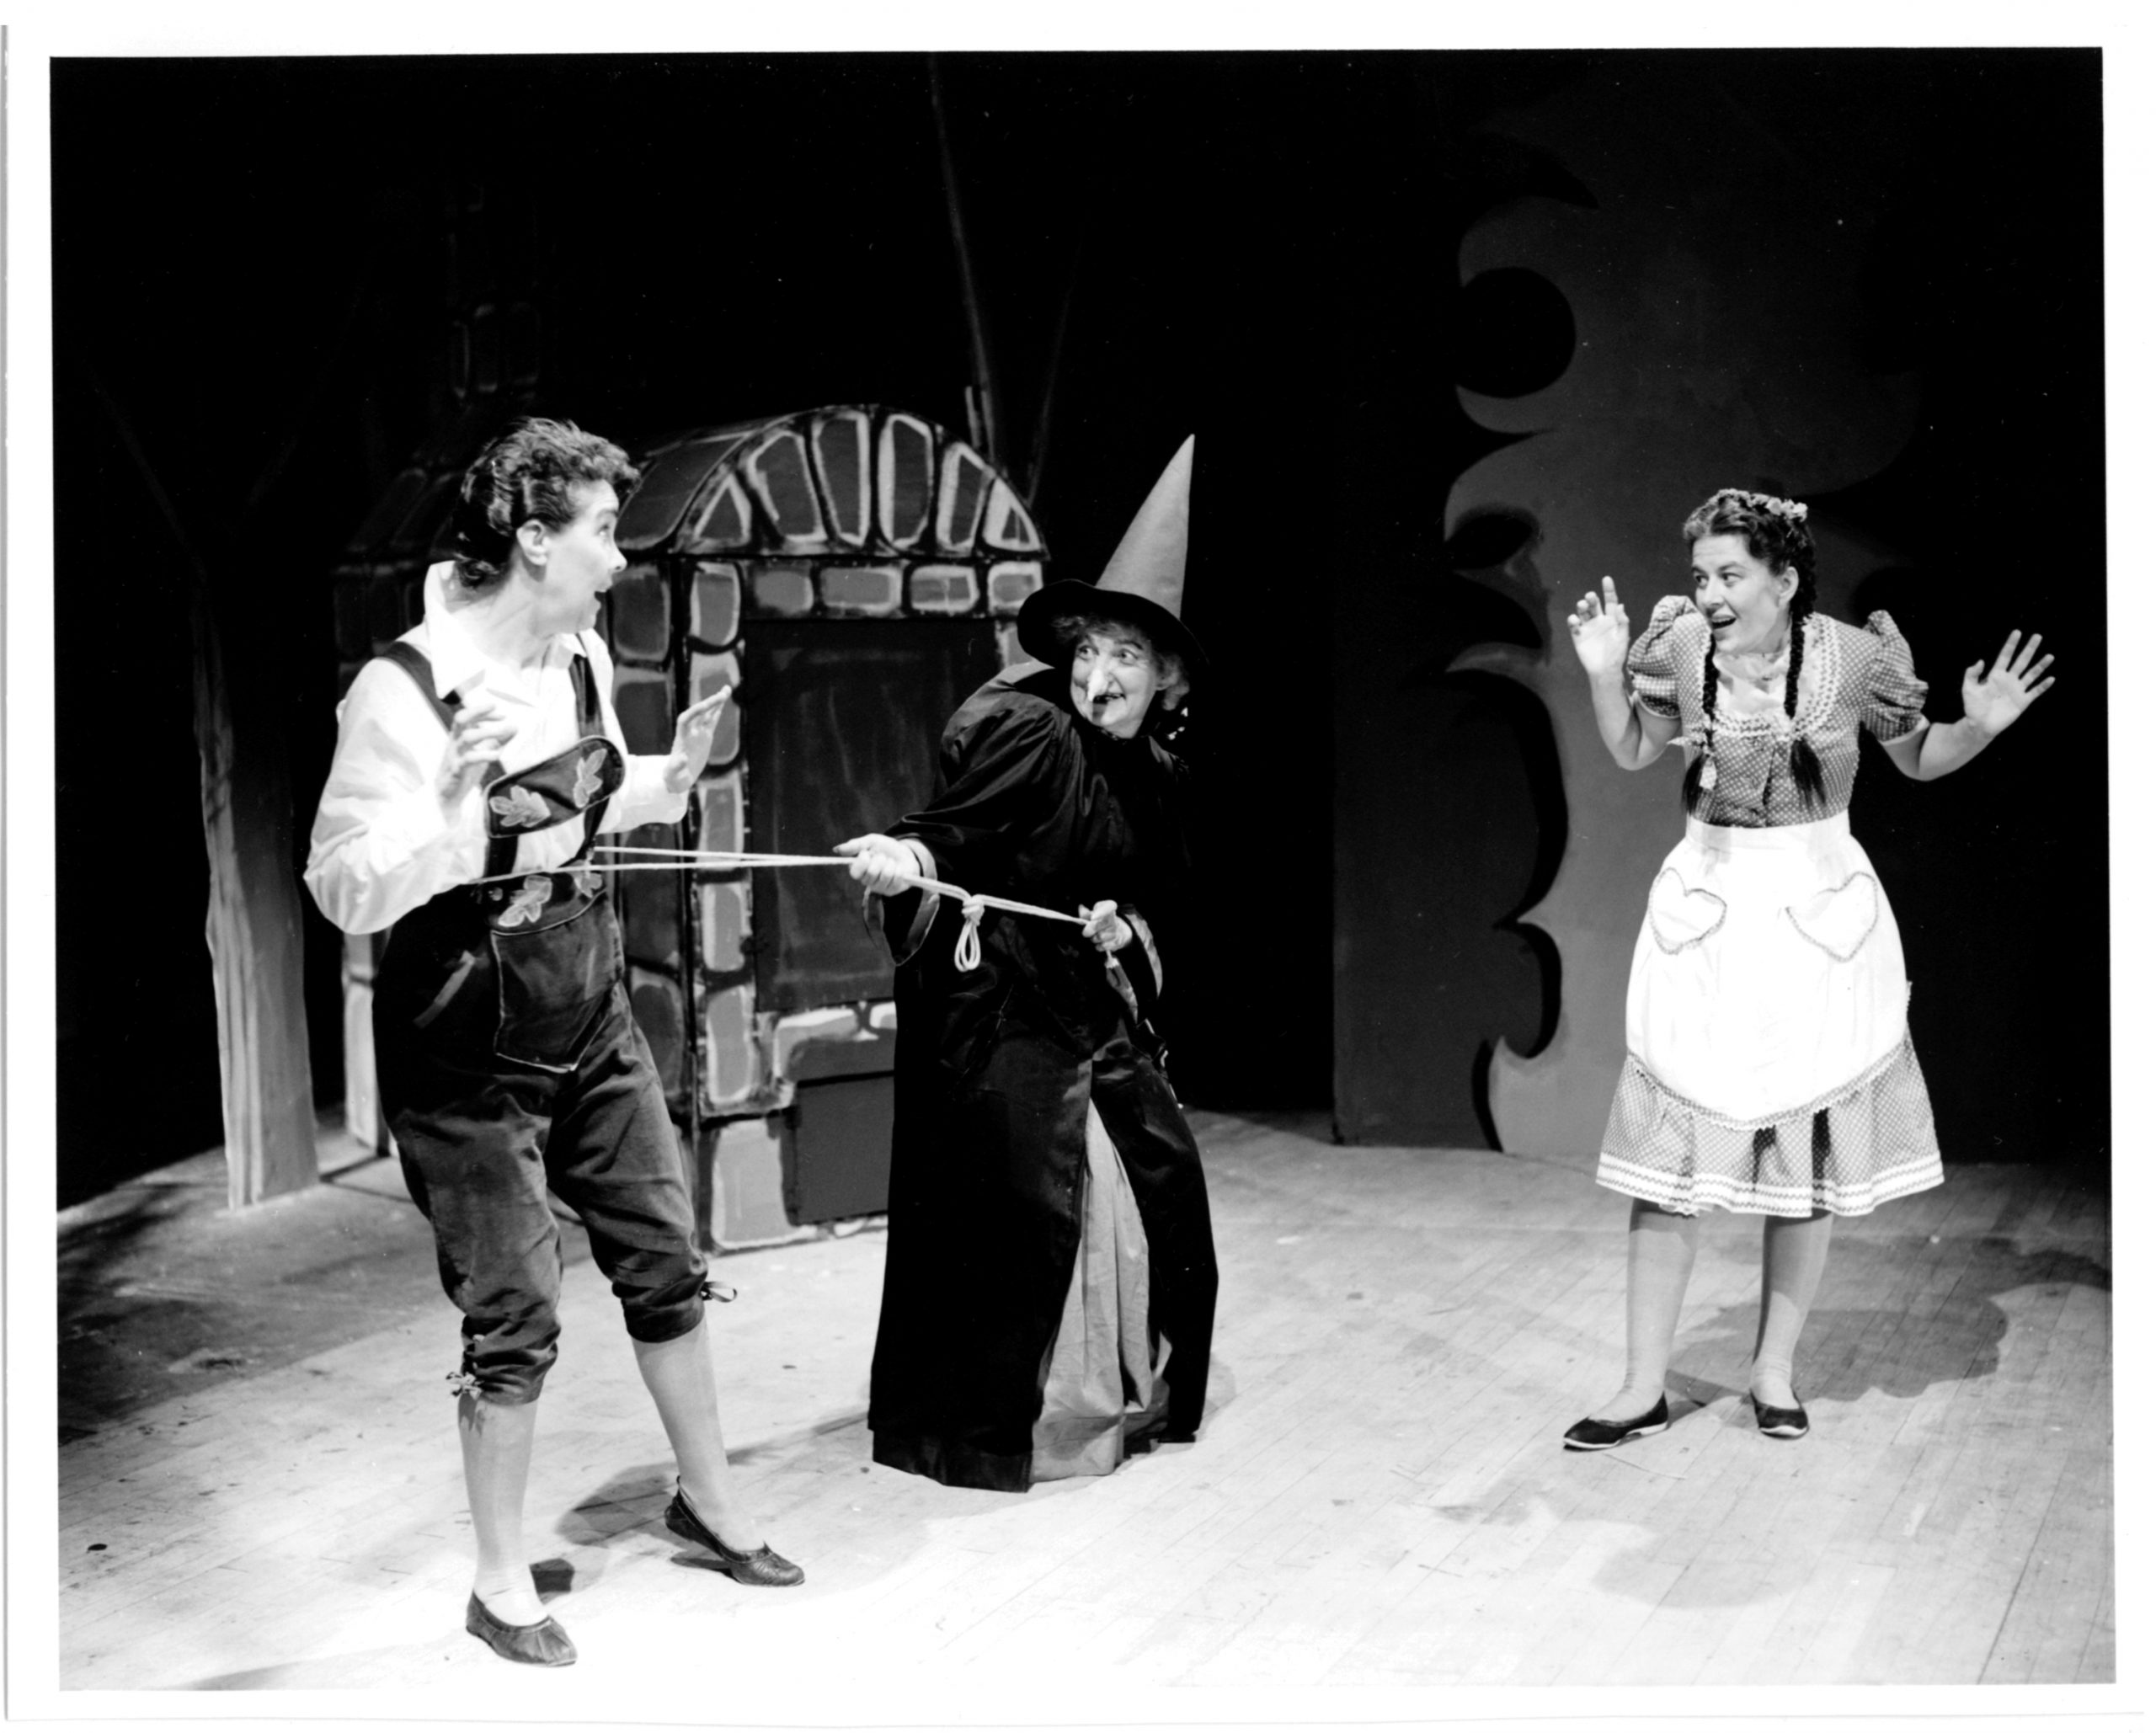 The Darke Hall stage was home to this 1959 production of Hansel and Grete
l.
